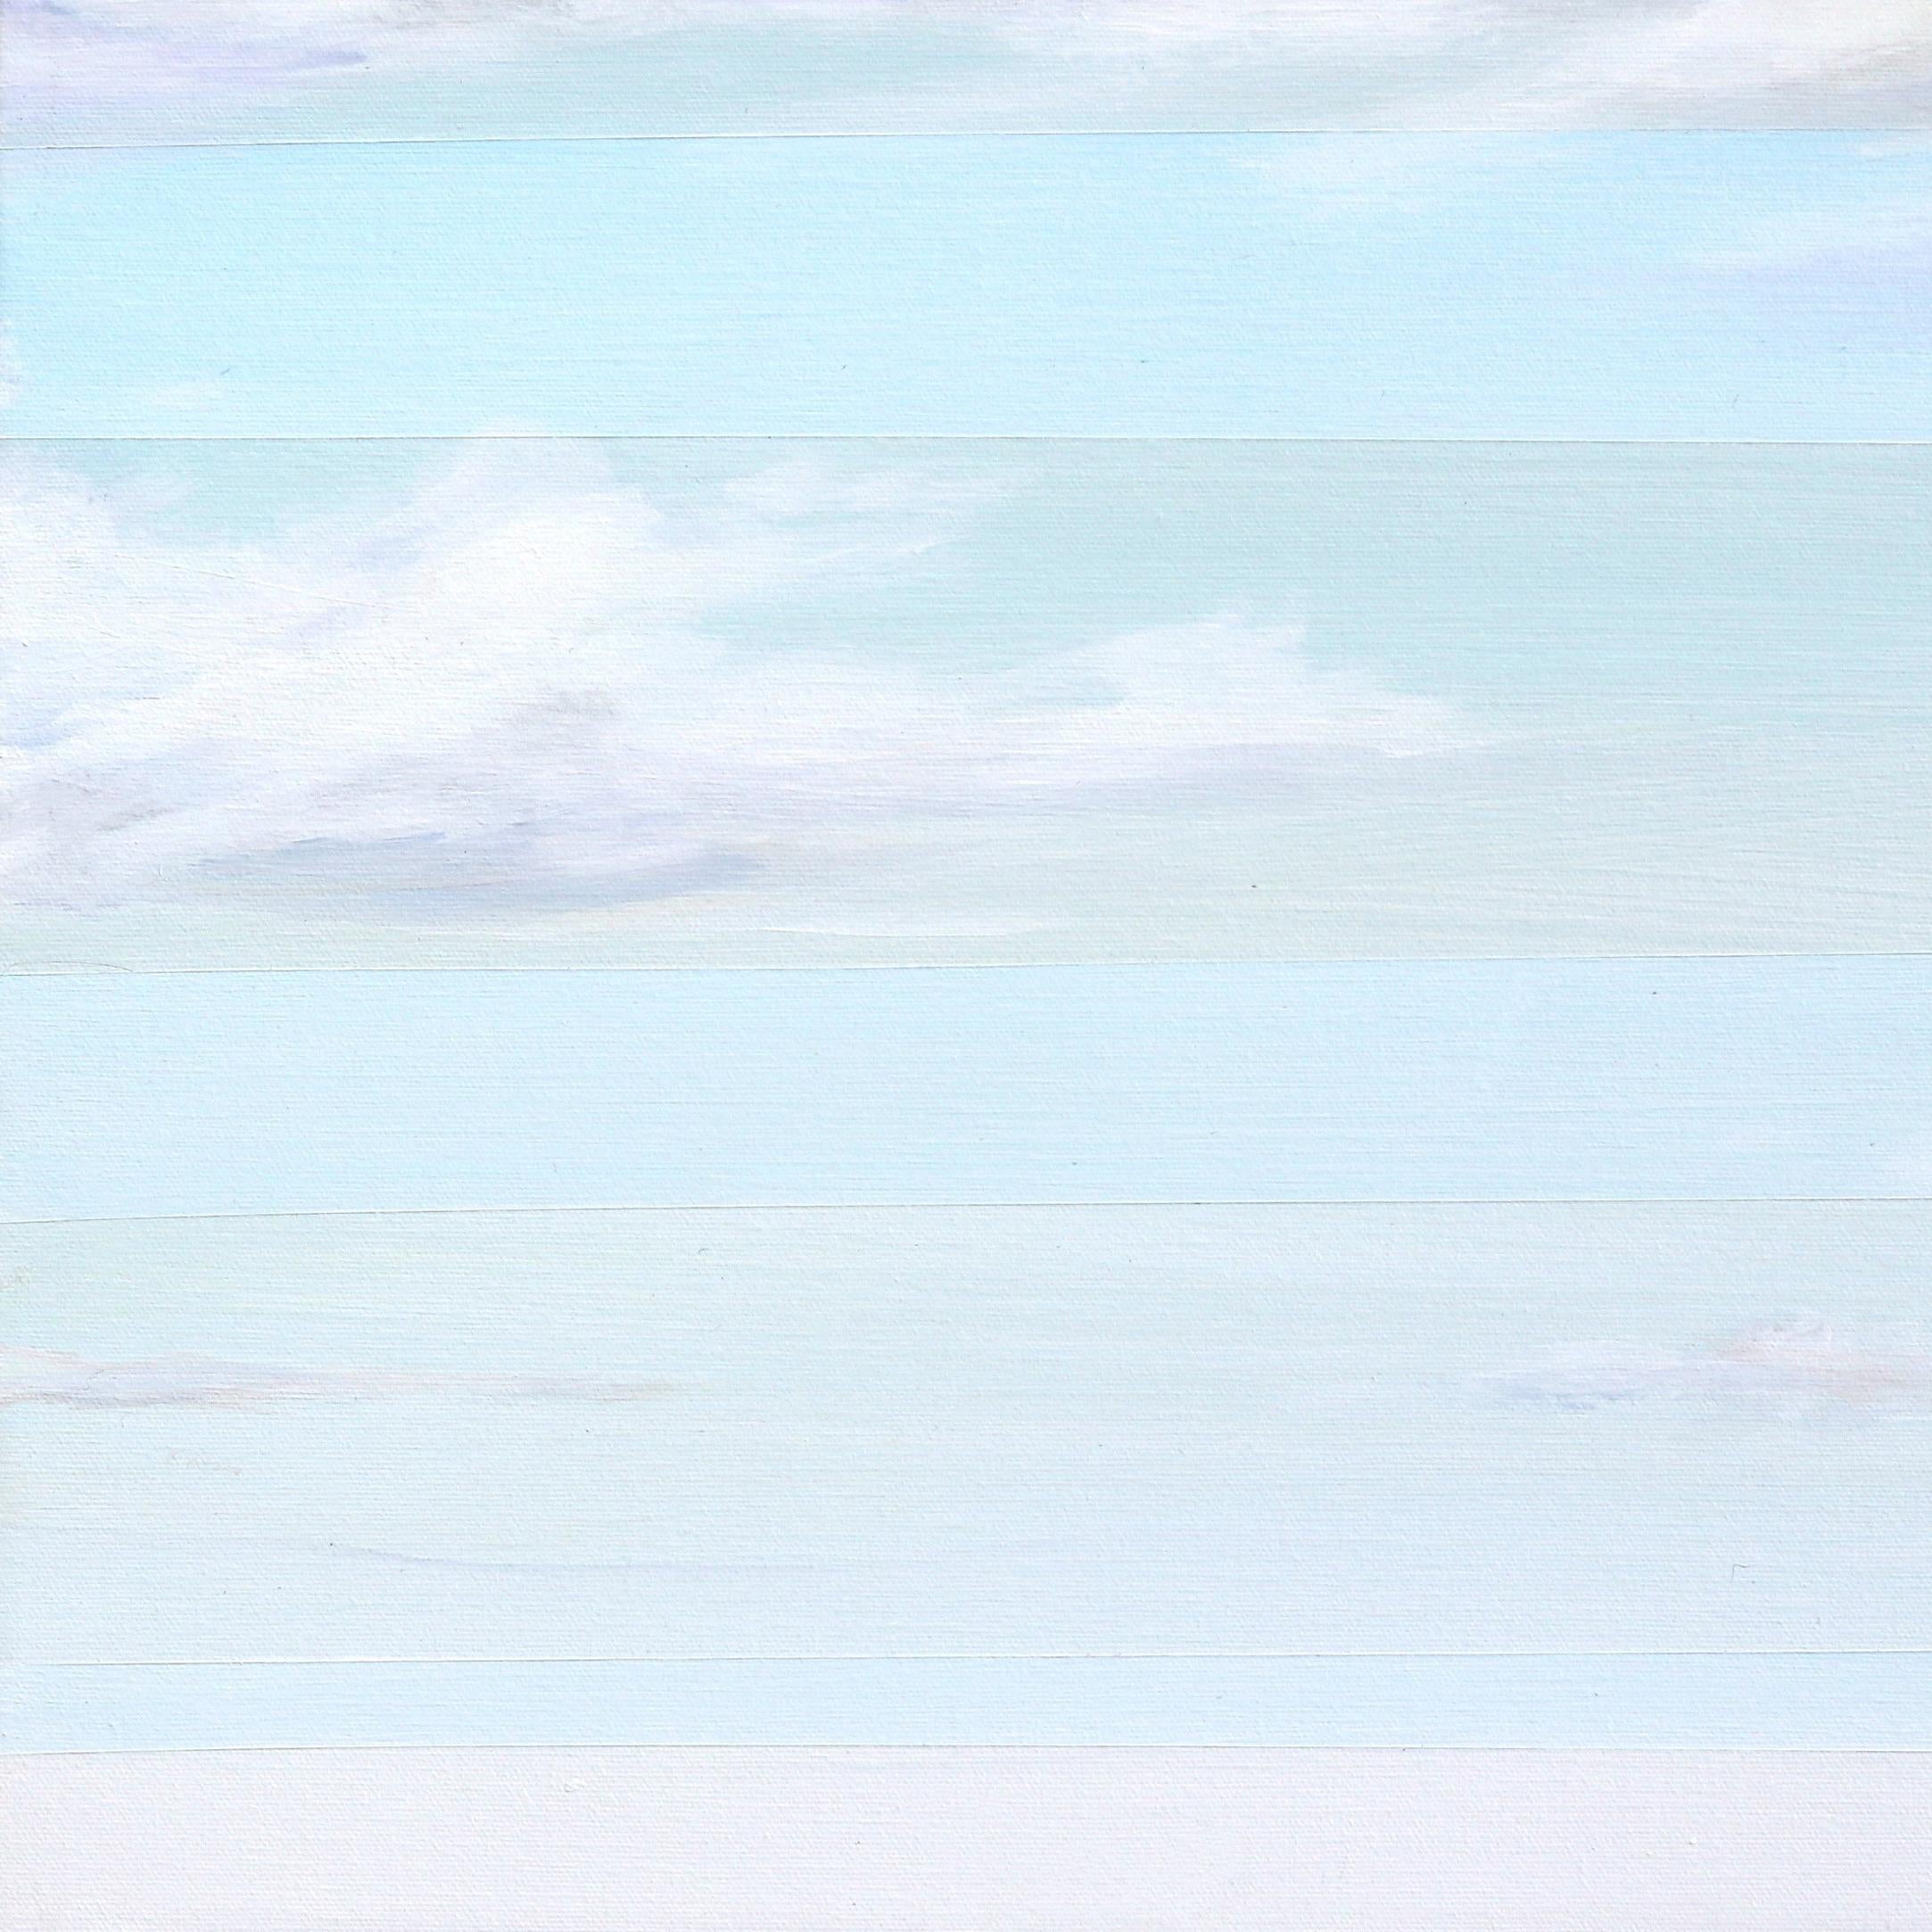 Morning Breeze 2 - Original Soft Sky Painting with Geometric Accents For Sale 3